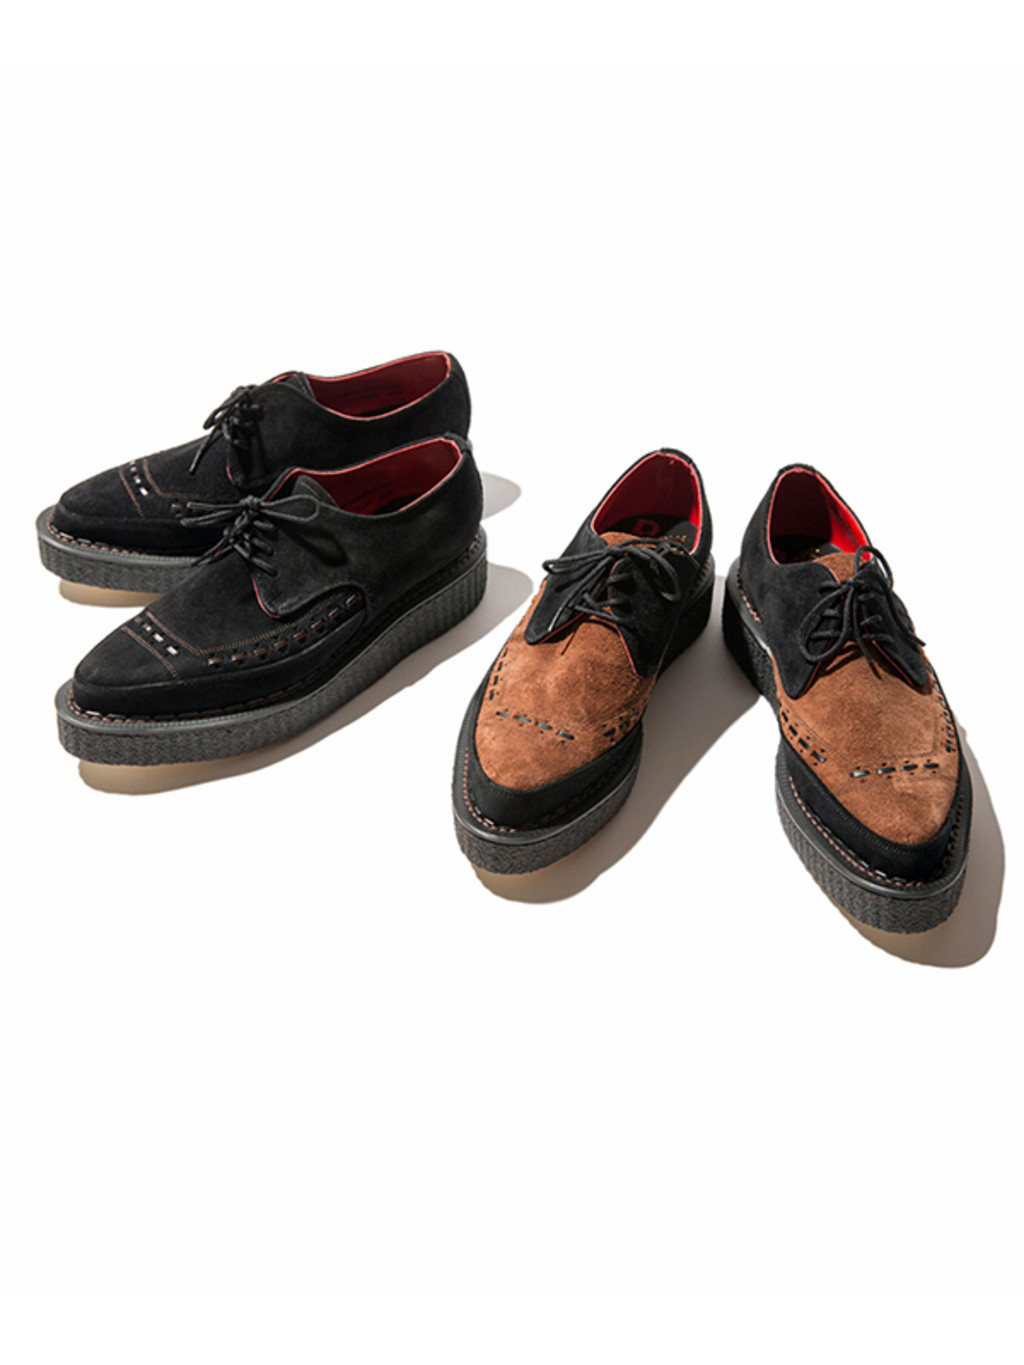 Lewis Leathers X George Cox Creeper Brown : HIDE/AND/RIDE